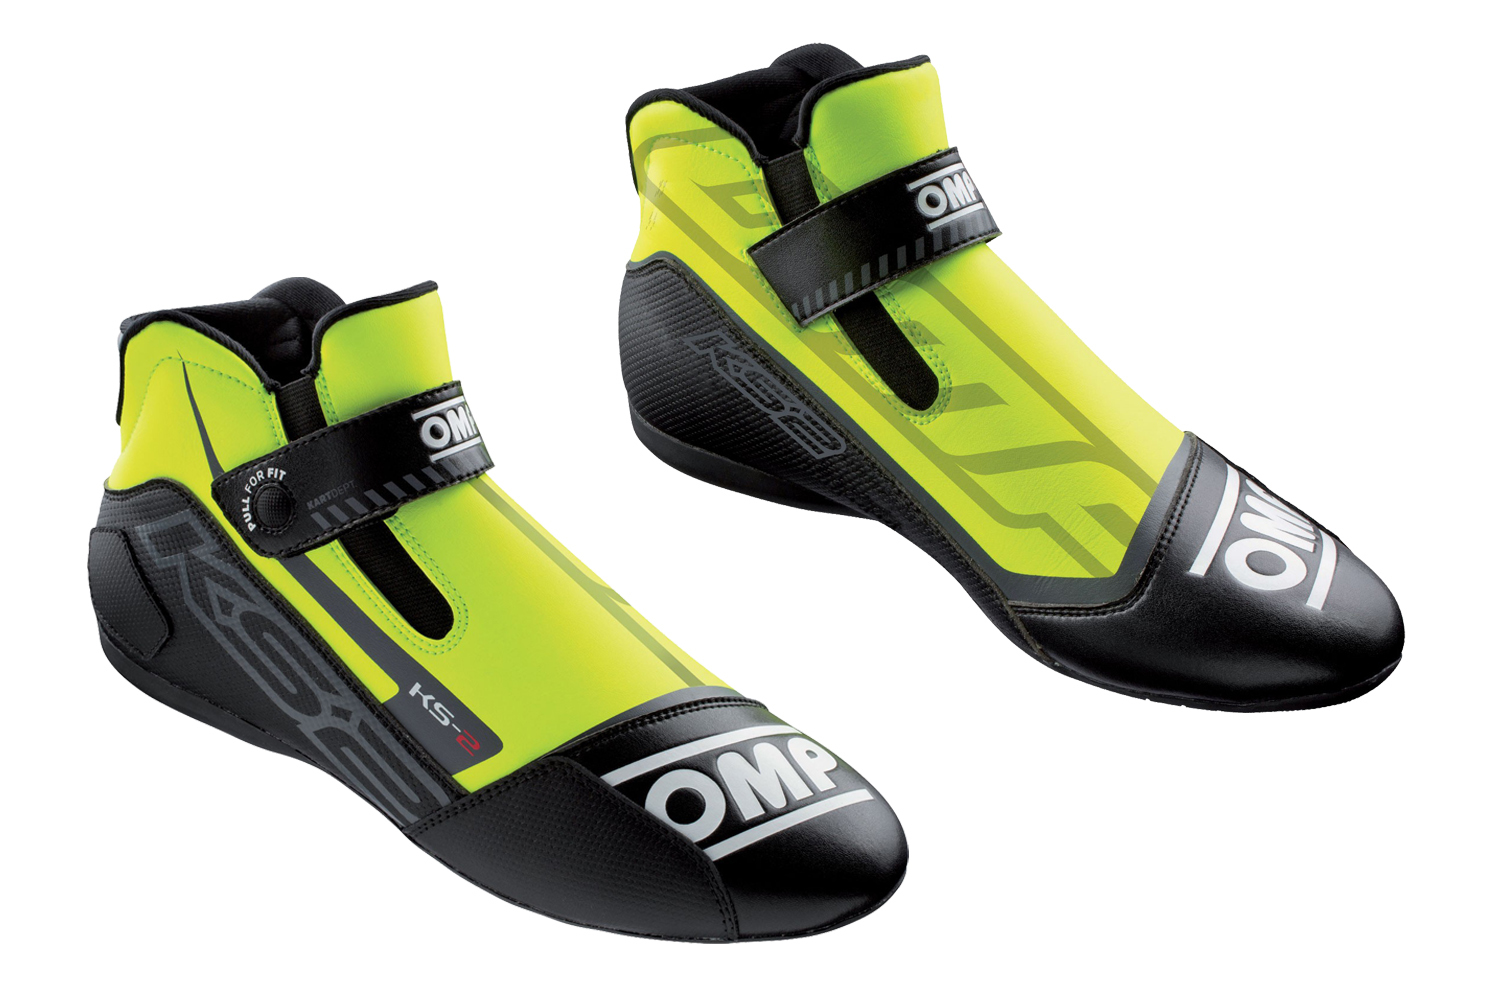 OMP Racing IC82505937 - Shoe, KS-2, Driving, Mid-Top, FIA Approved, Suede Leather Outer, Fire Retardant Fabric Inner, Fluorescent Yellow / Black, Euro Size 37, Pair